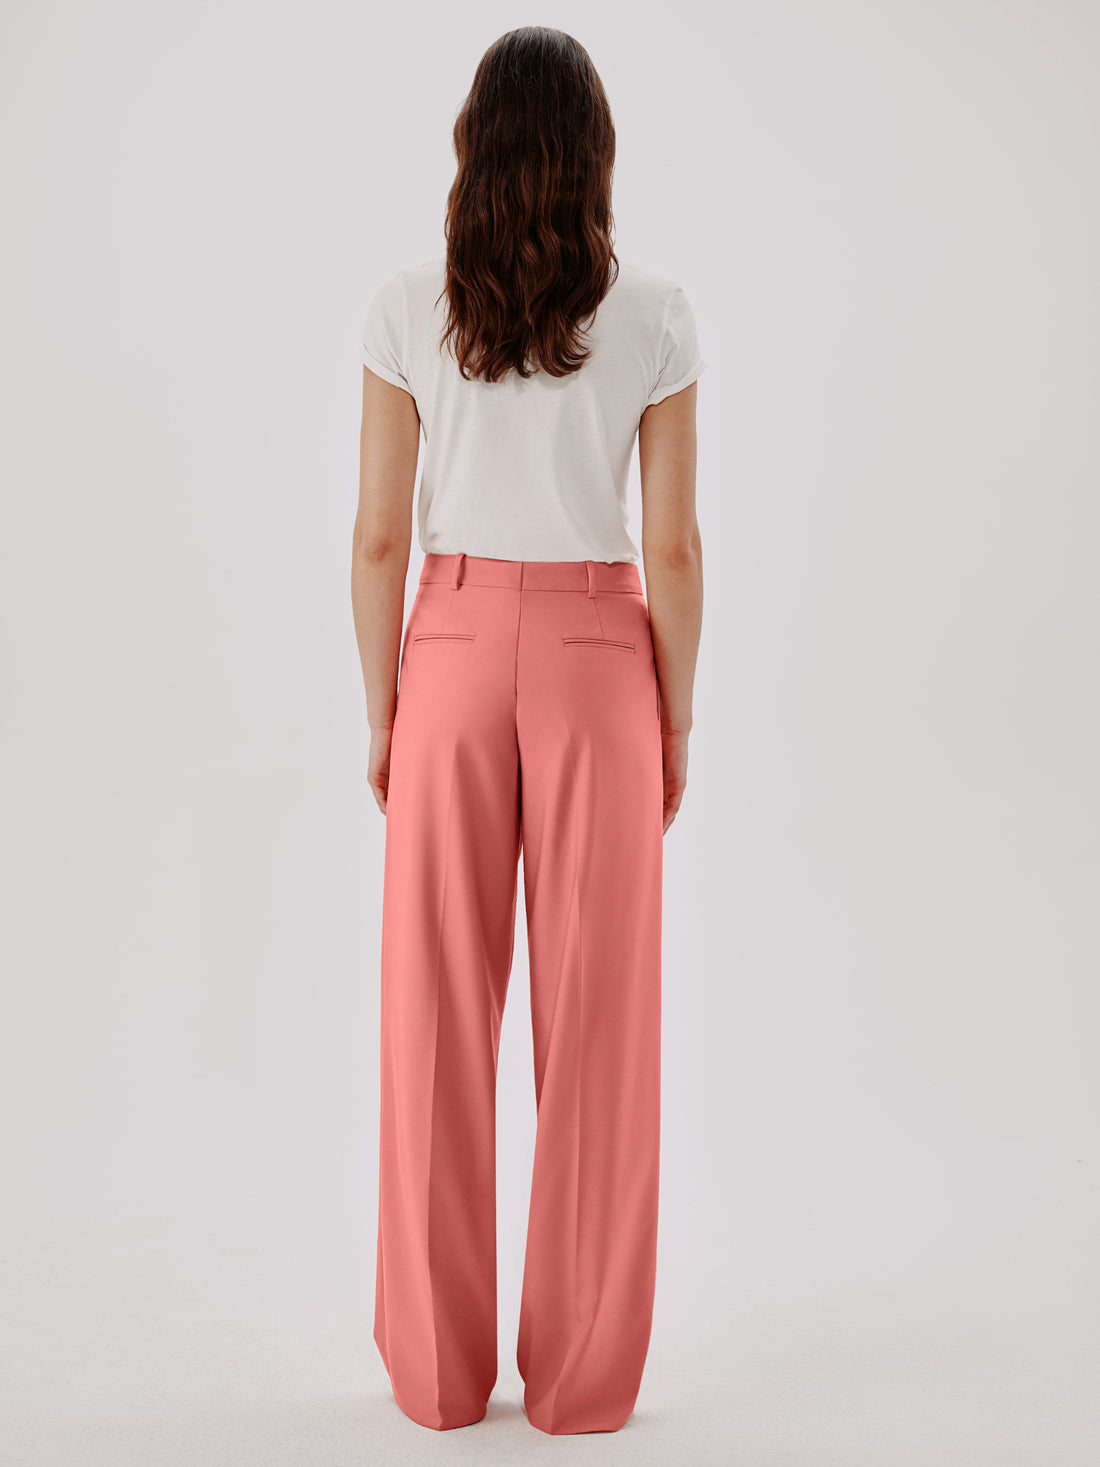 Product image43 with color pink